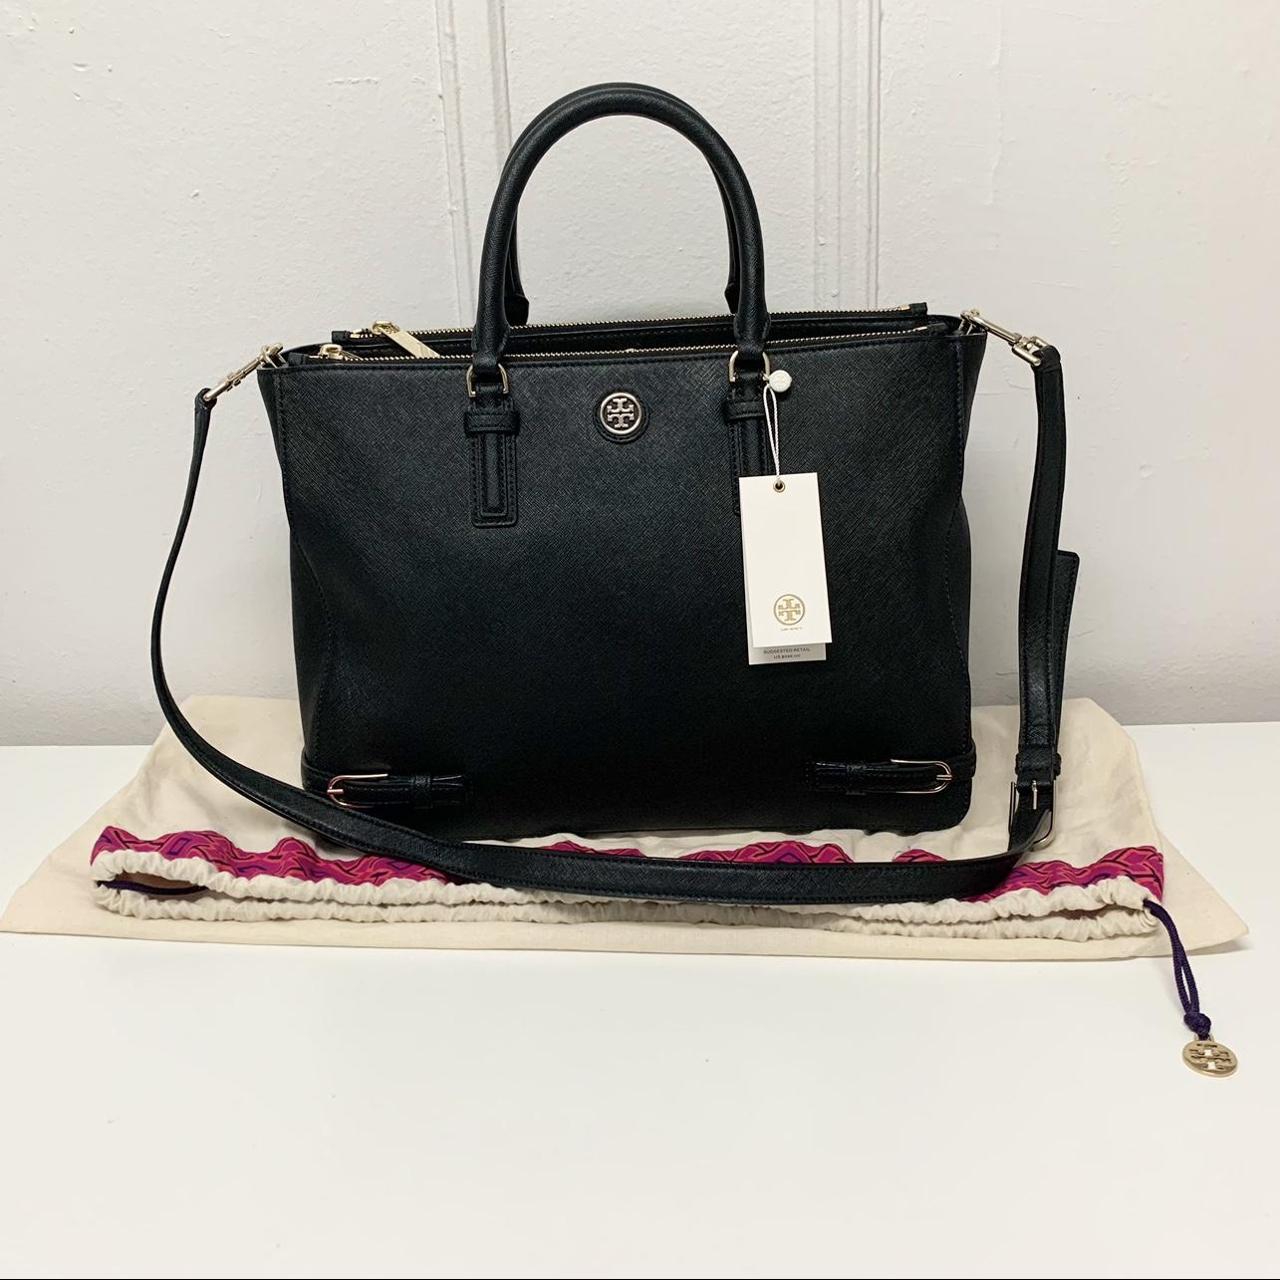 Tory Burch Black Saffiano Leather Robinson Double Zip Tote Tory